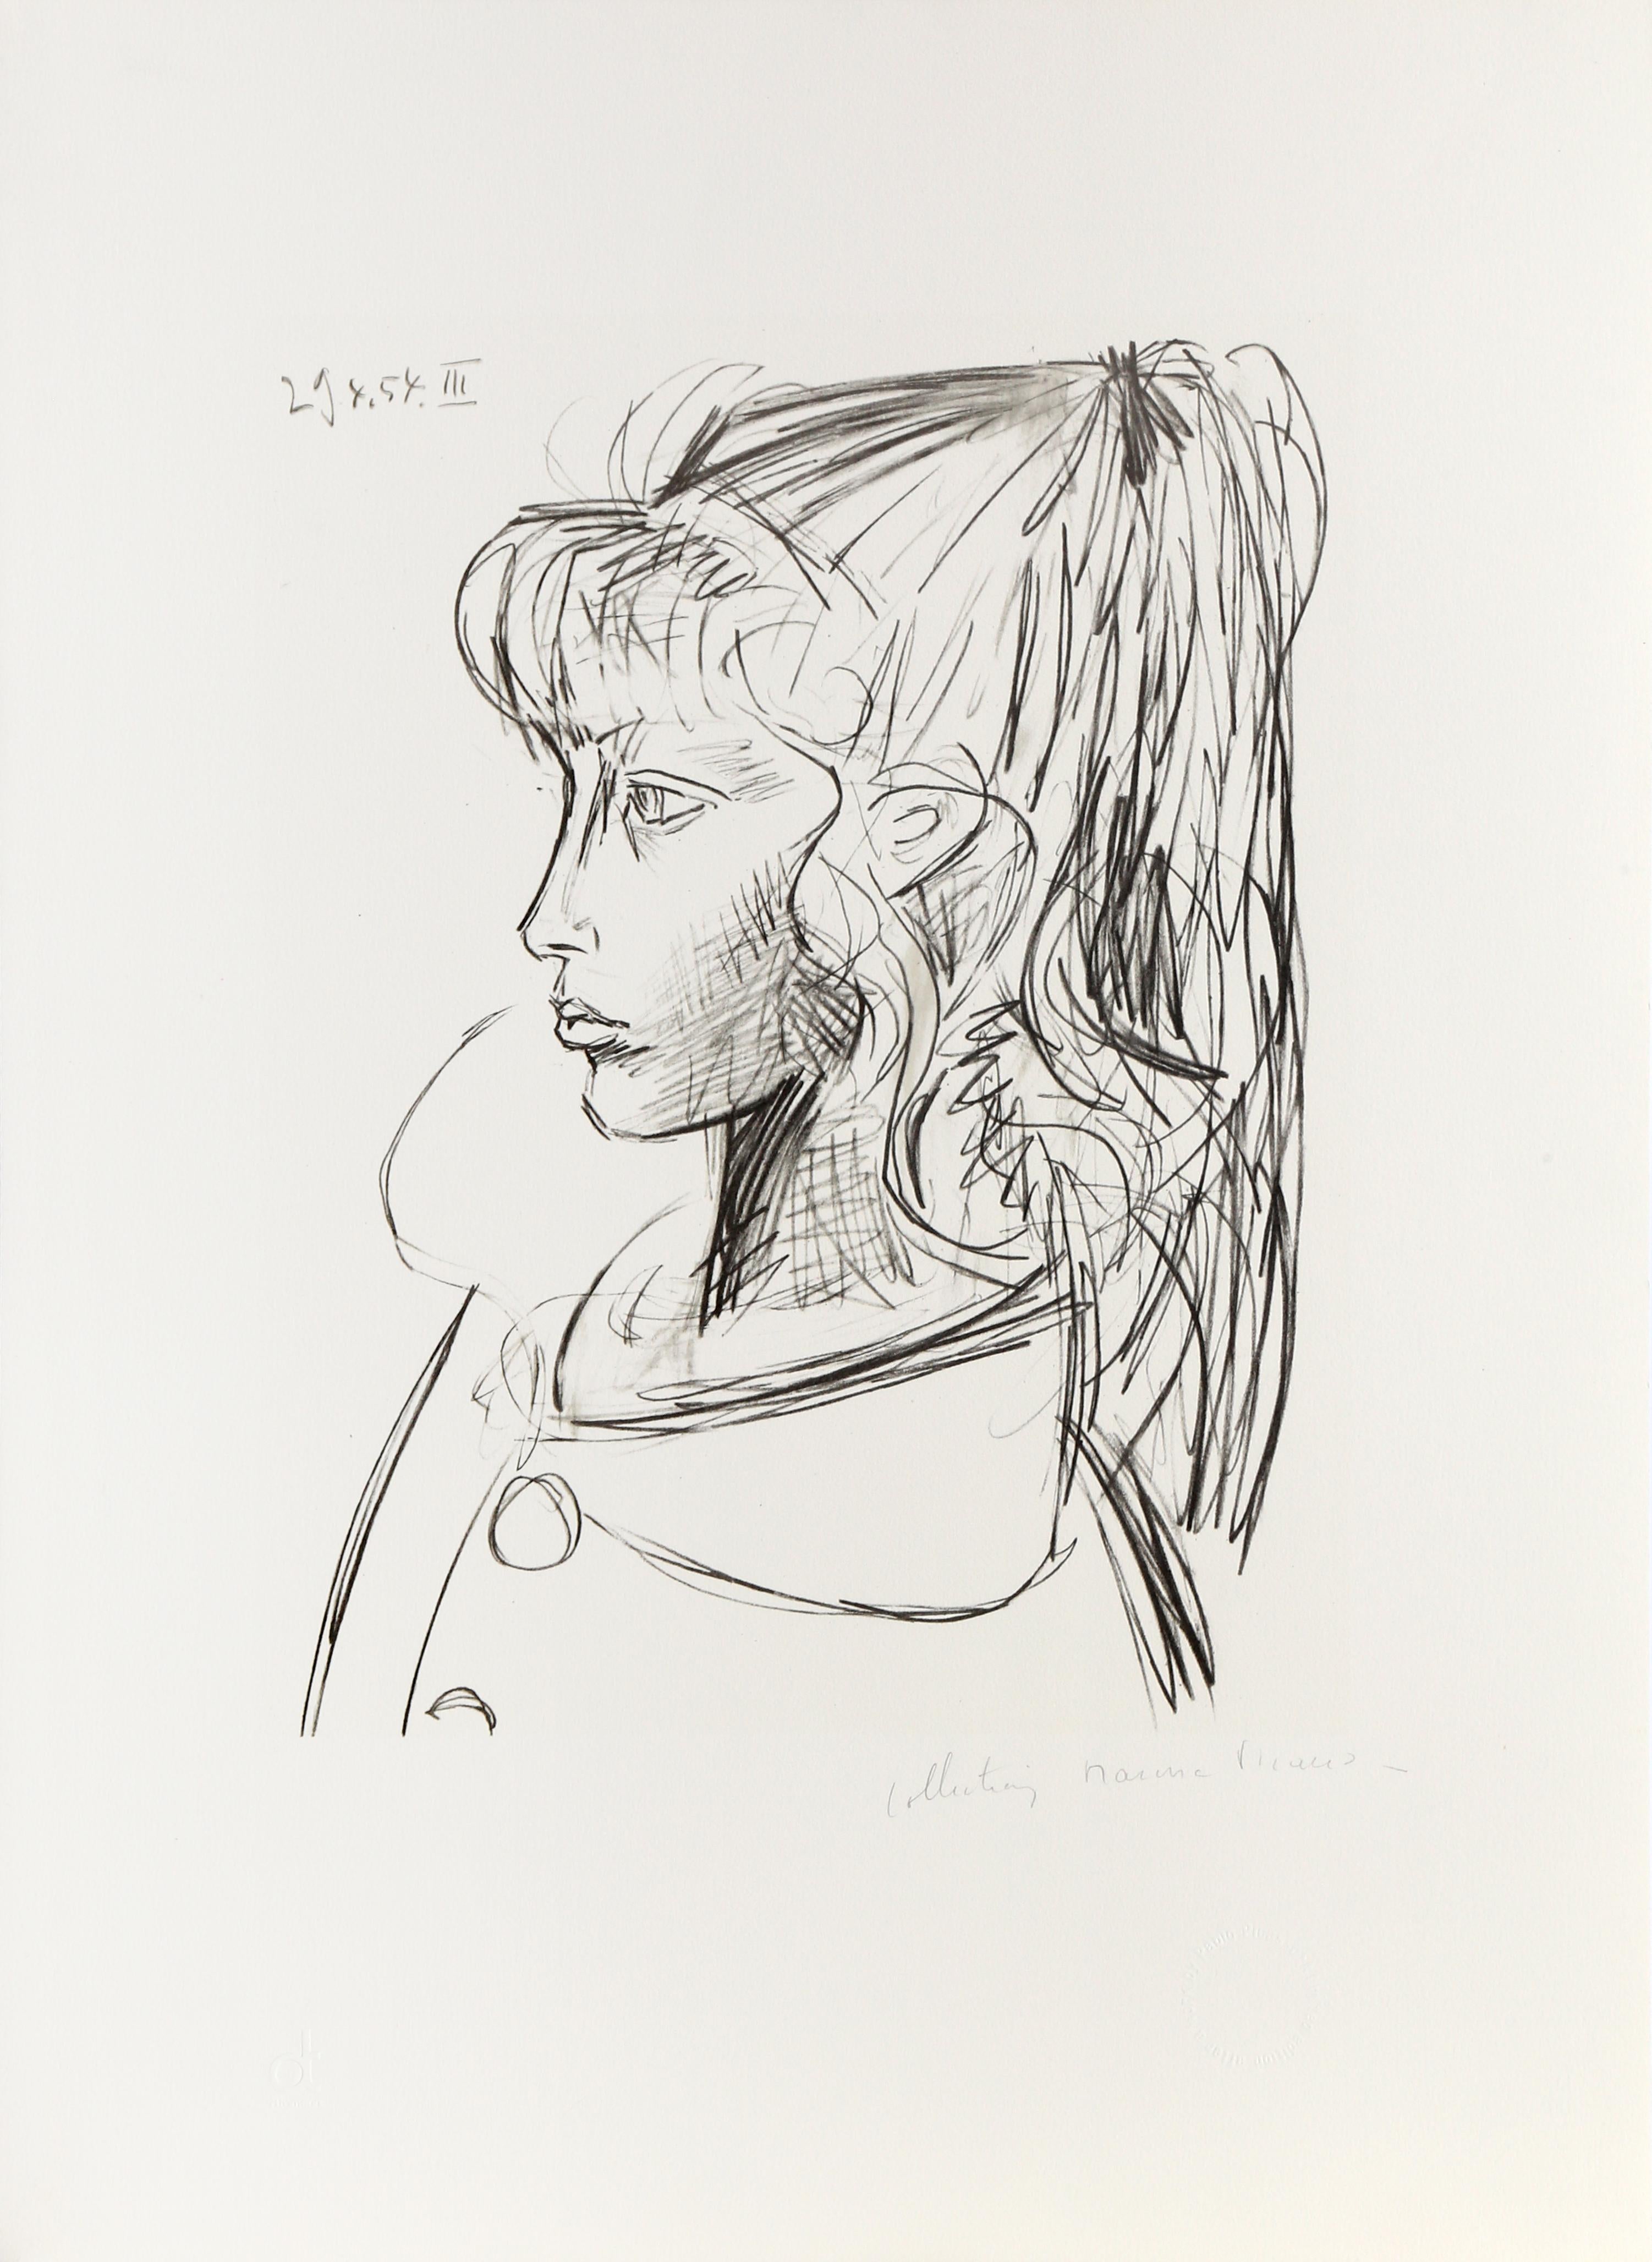 Rendered in profile, Pablo Picasso's portrait of the young Sylvette David is an example of the artist's ability to capture youth and vibrancy even in black-and-white portraits. A young adult at the time of its creation, Sylvette David can be seen in